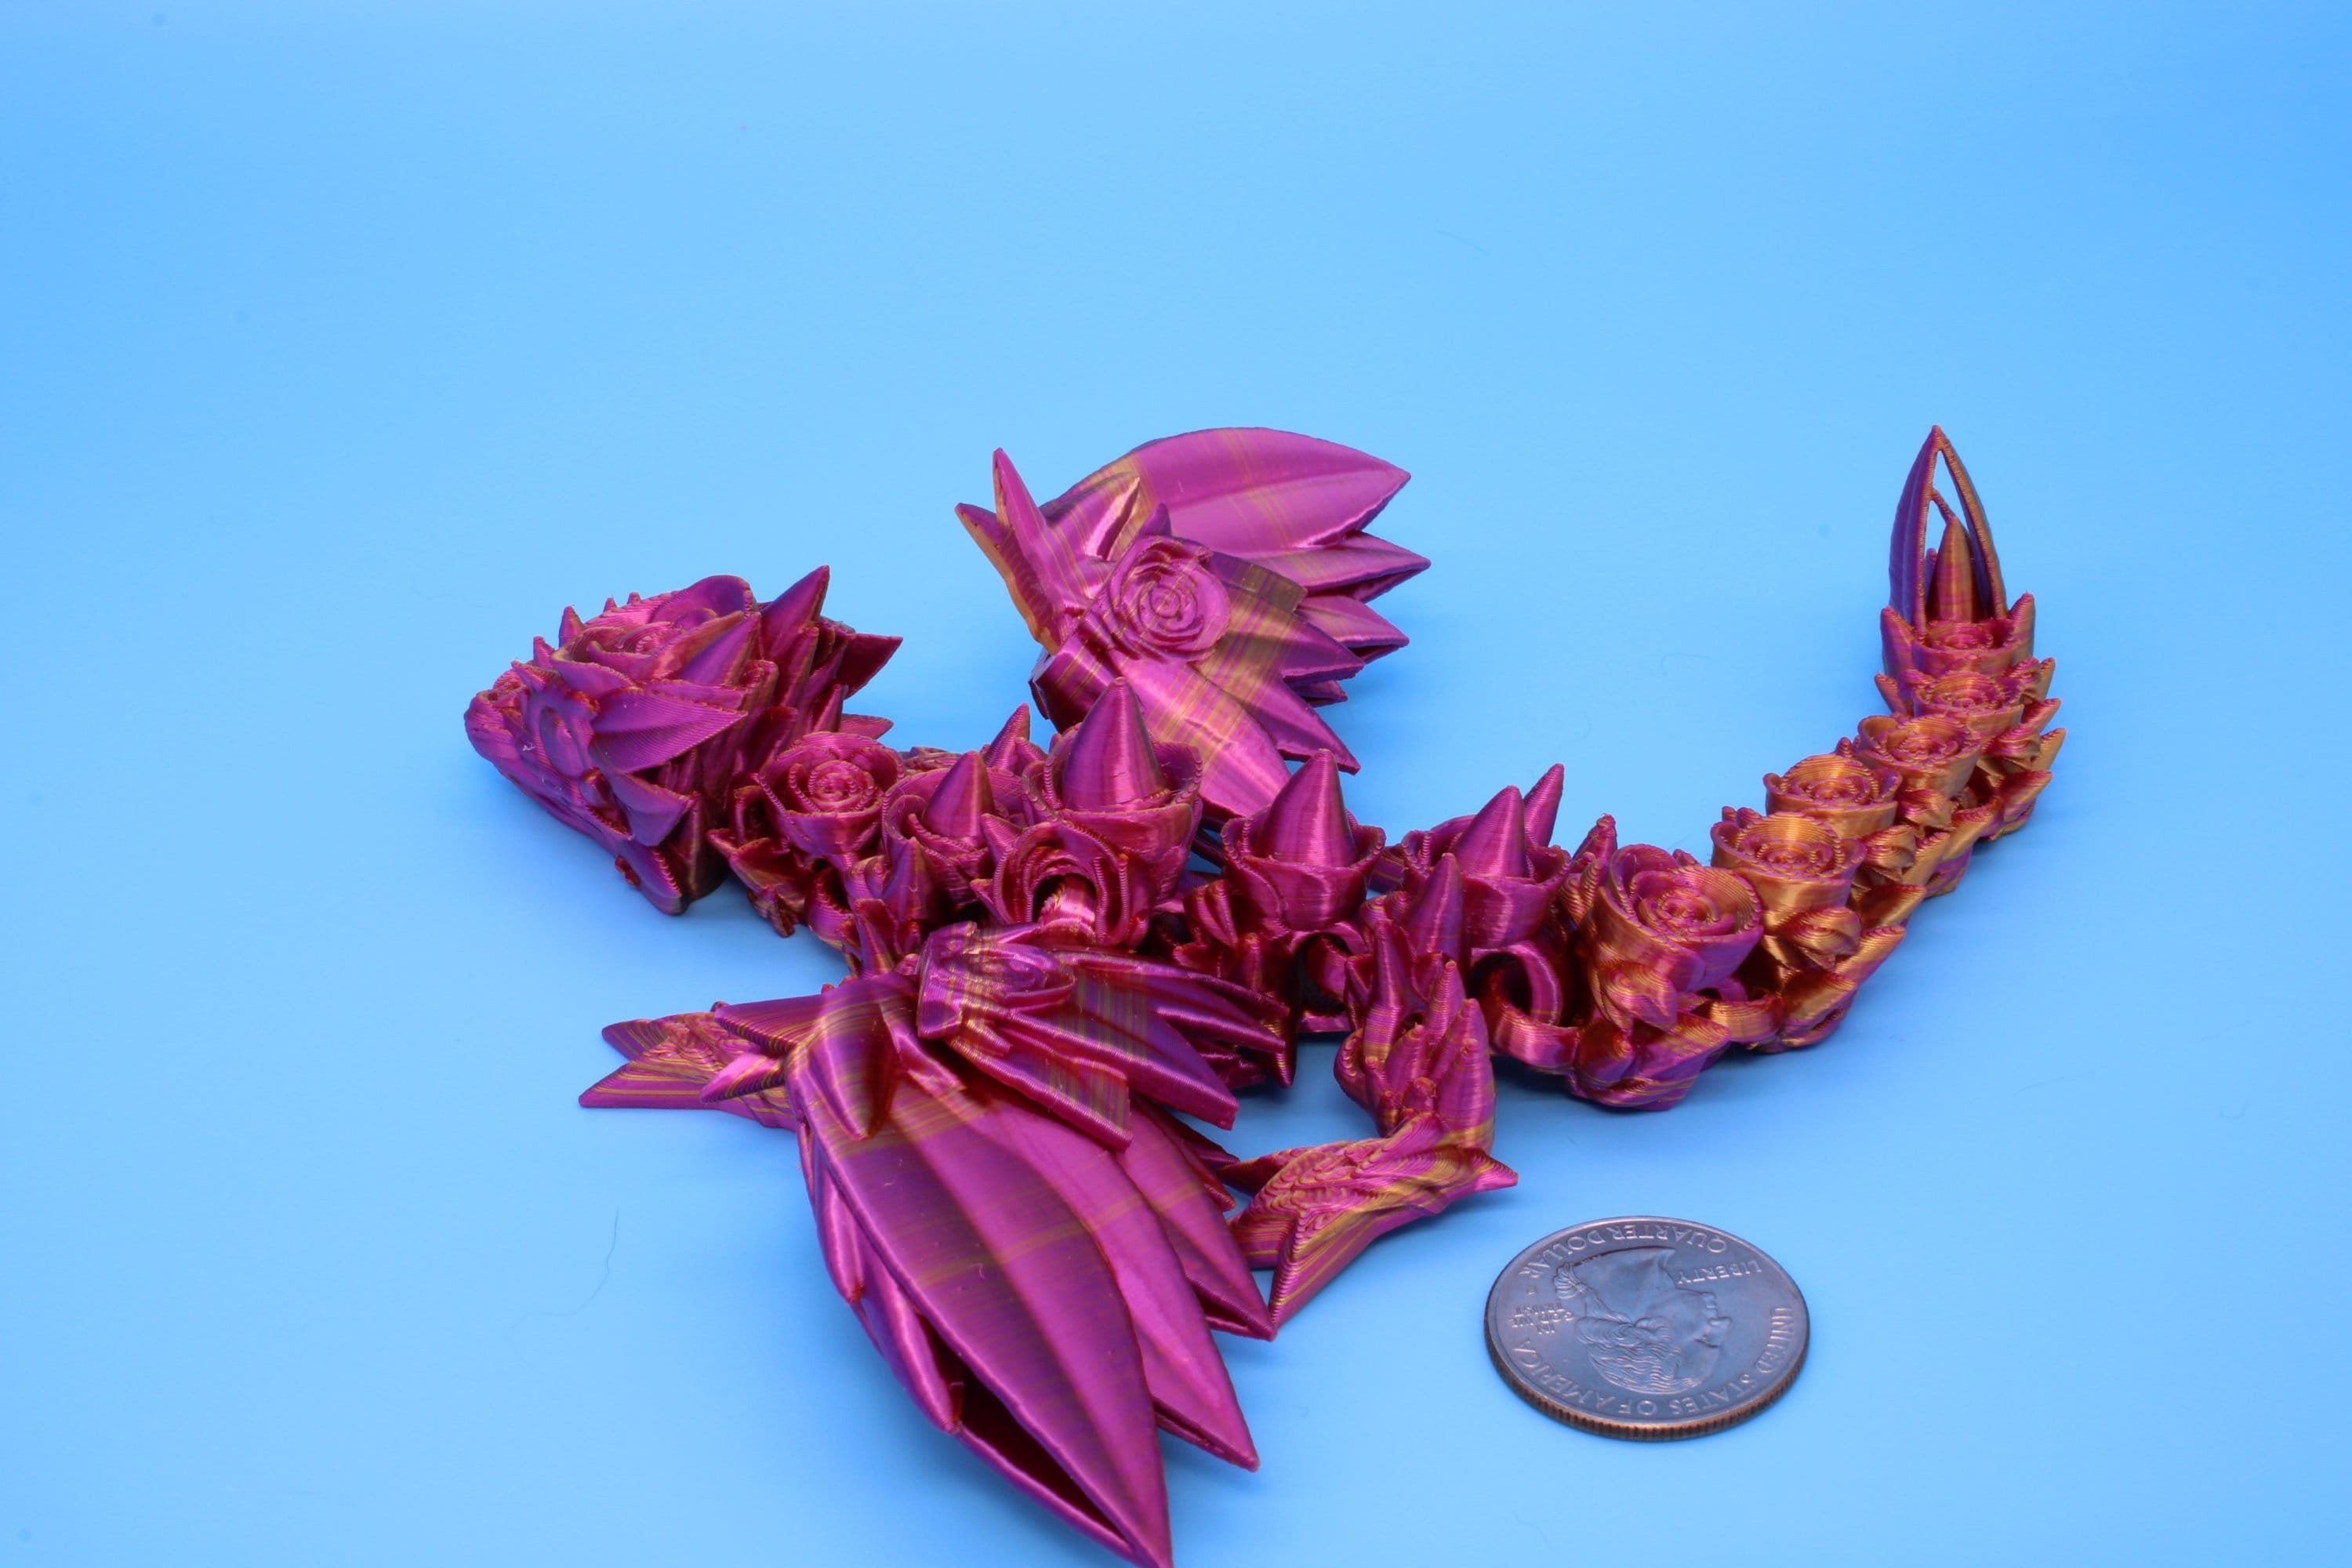 Miniature Baby Rose Wing Dragon | Pink & Gold | 3D printed articulating Toy Fidget | Flexi Toy 8.5 in. head to tail | Stress Relief Gift